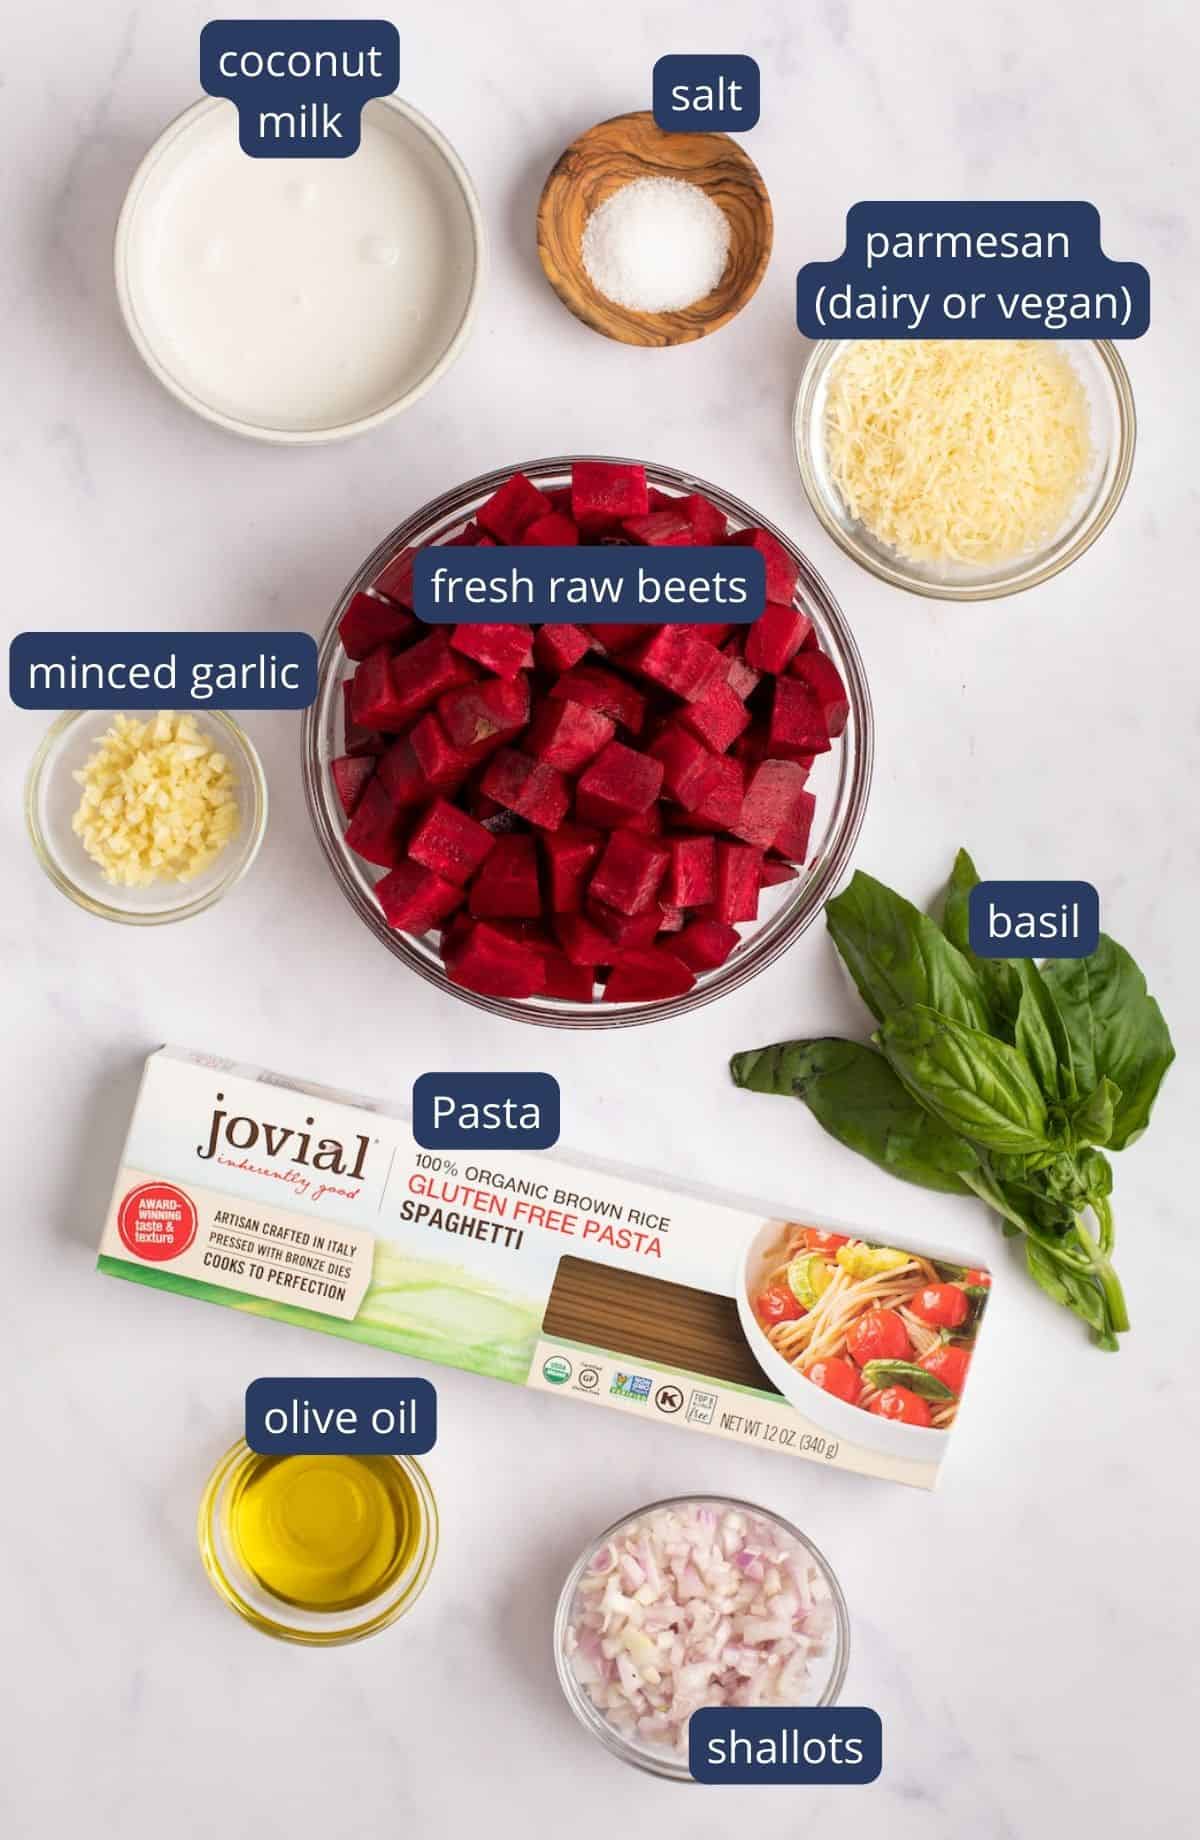 Barbie Pasta ingredients with text overlay